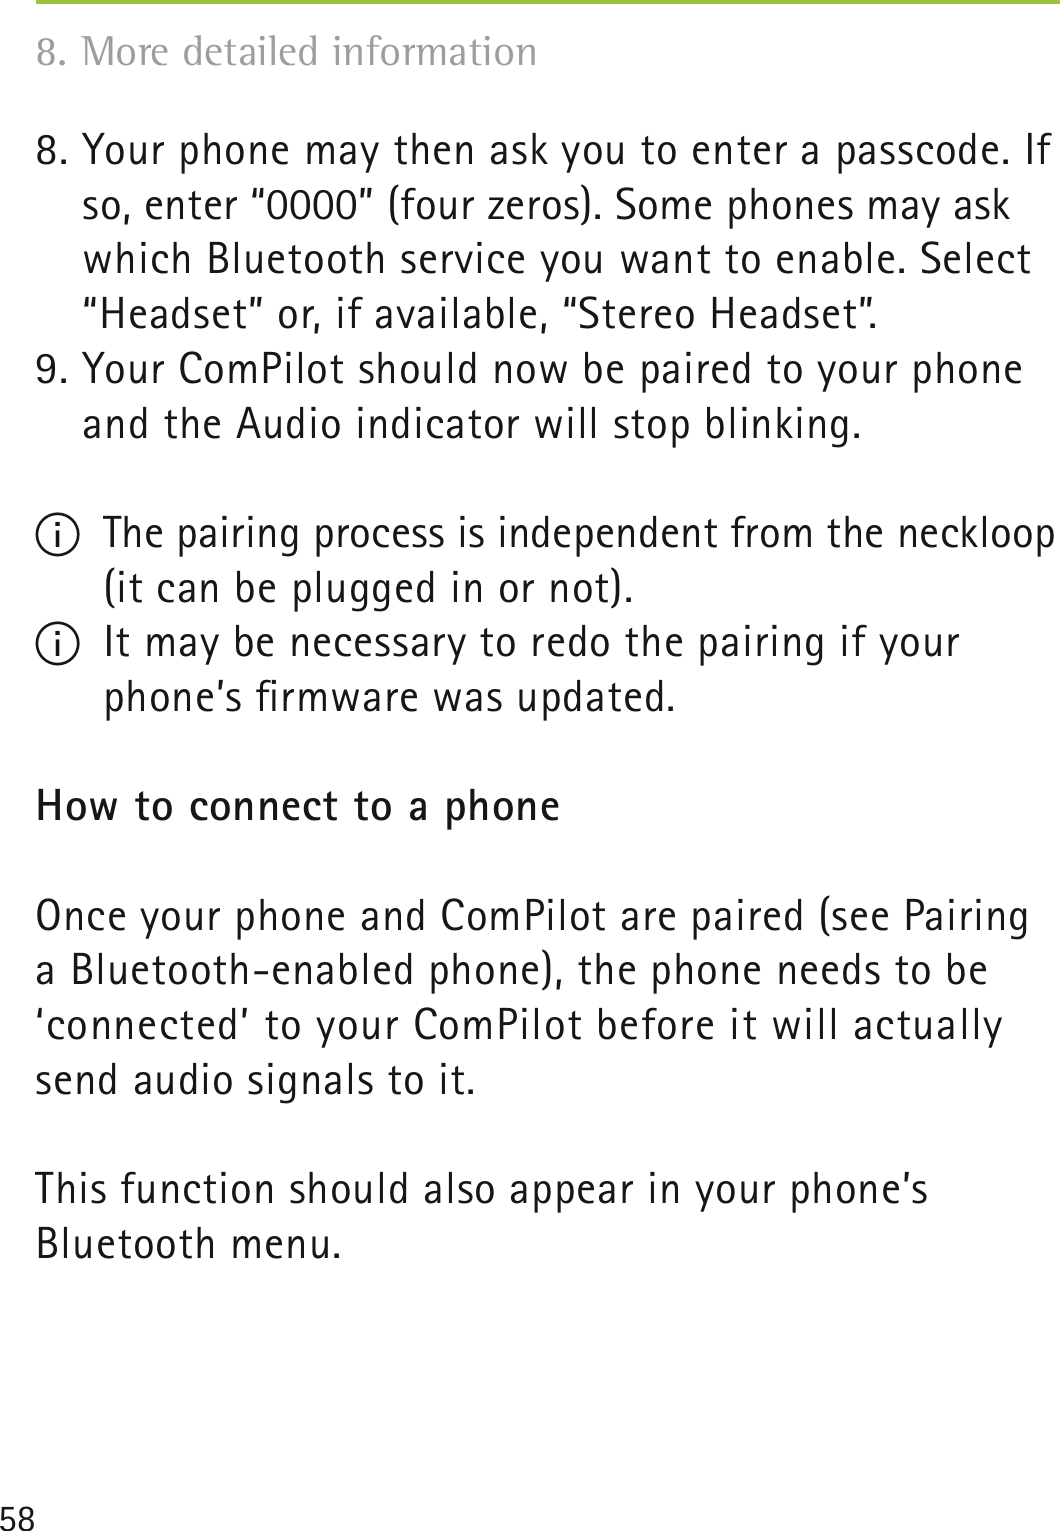 588. Your phone may then ask you to enter a passcode. If so, enter “0000” (four zeros). Some phones may ask which Bluetooth service you want to enable. Select “Headset” or, if available, “Stereo Headset”.9. Your ComPilot should now be paired to your phone and the Audio indicator will stop blinking. I  The pairing process is independent from the neckloop    (it can be plugged in or not).I  It may be necessary to redo the pairing if your phone’s ﬁrmware was updated.How to connect to a phoneOnce your phone and ComPilot are paired (see Pairing a Bluetooth-enabled phone), the phone needs to be  ‘connected’ to your ComPilot before it will actually send audio signals to it.This function should also appear in your phone’s Bluetooth menu.8. More detailed information 